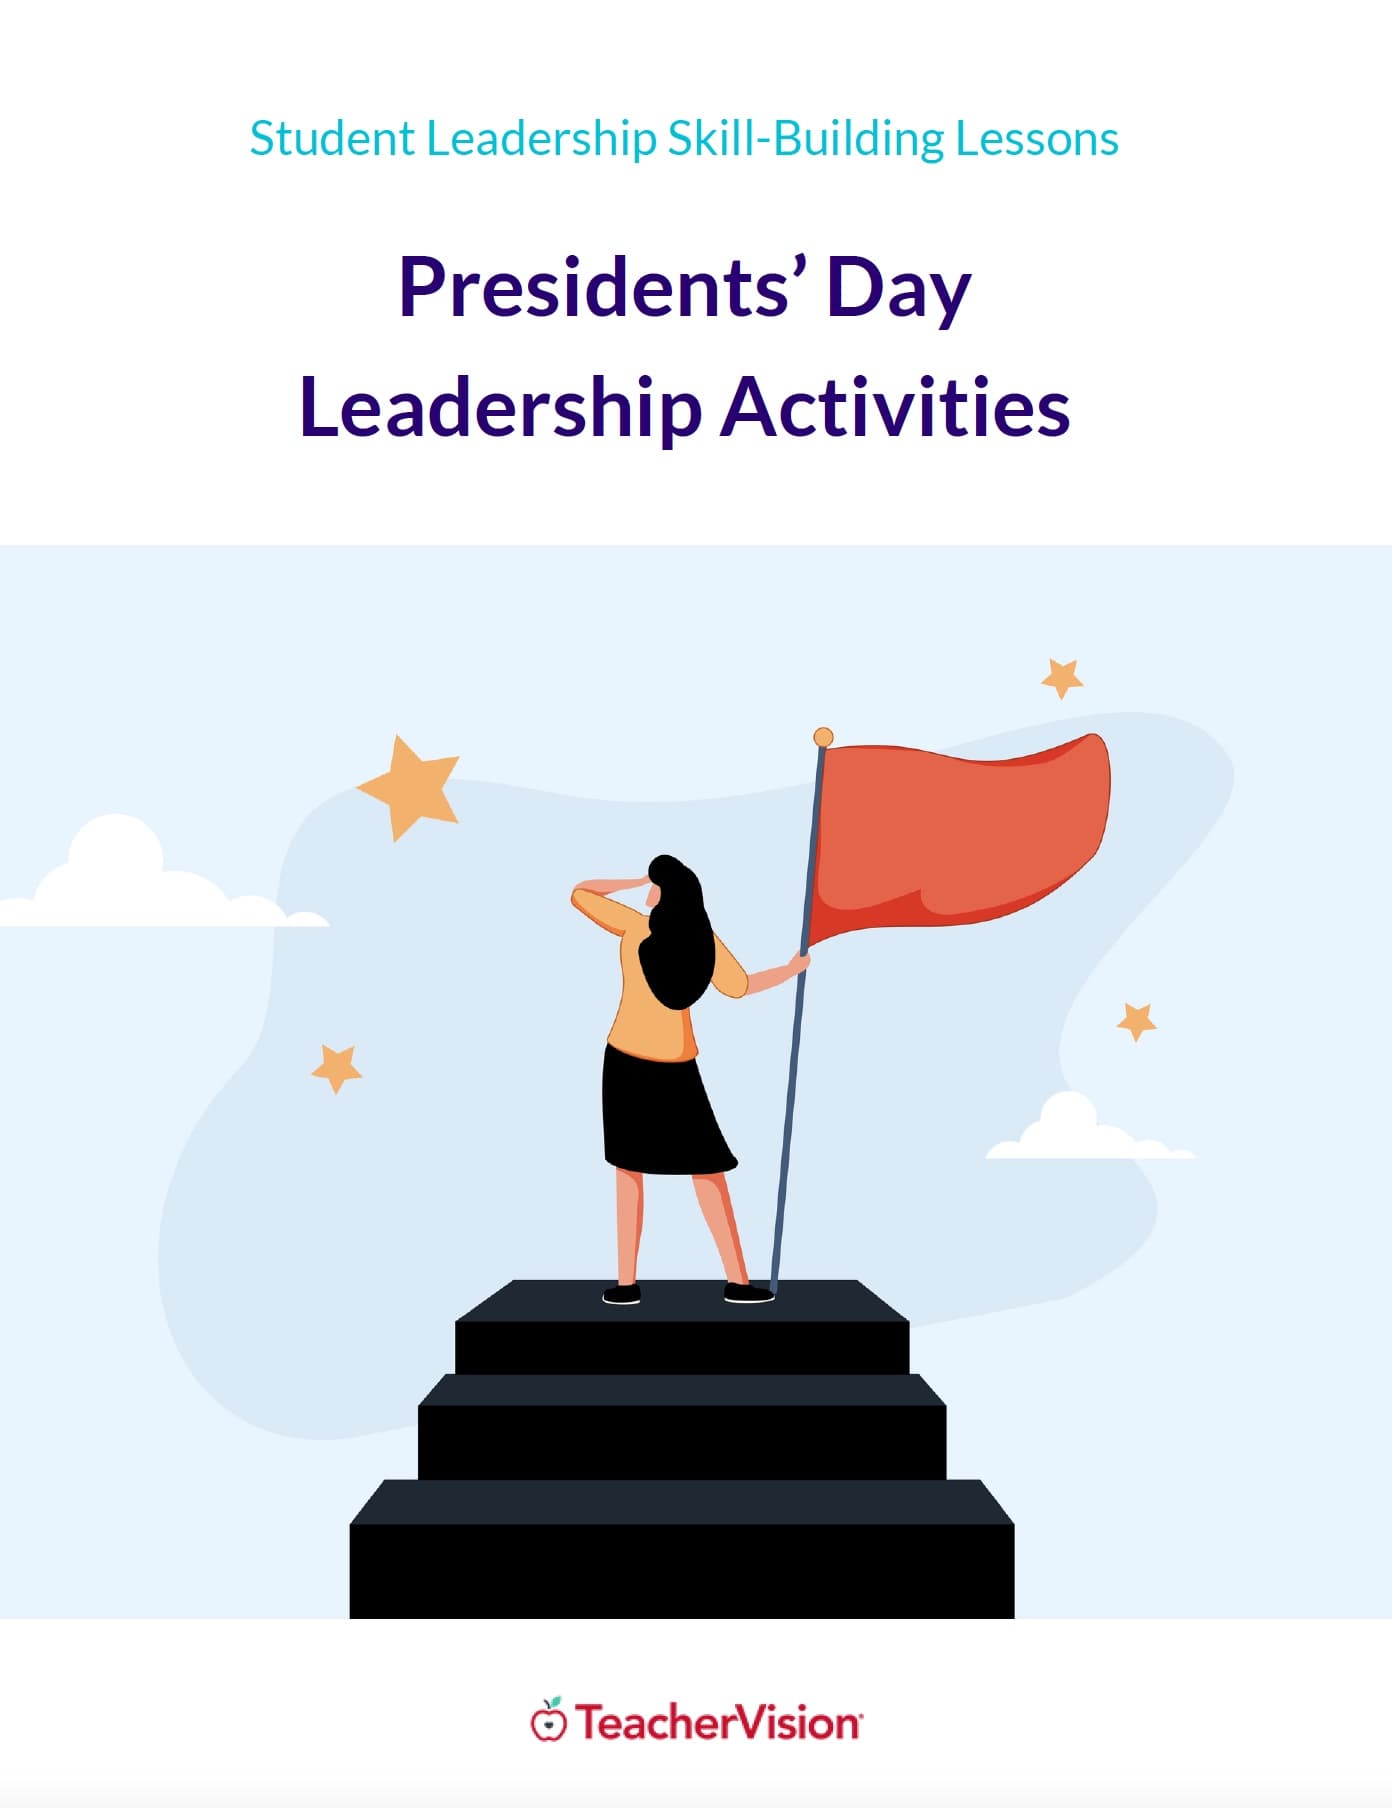 Presidents' Day Leadership Activities